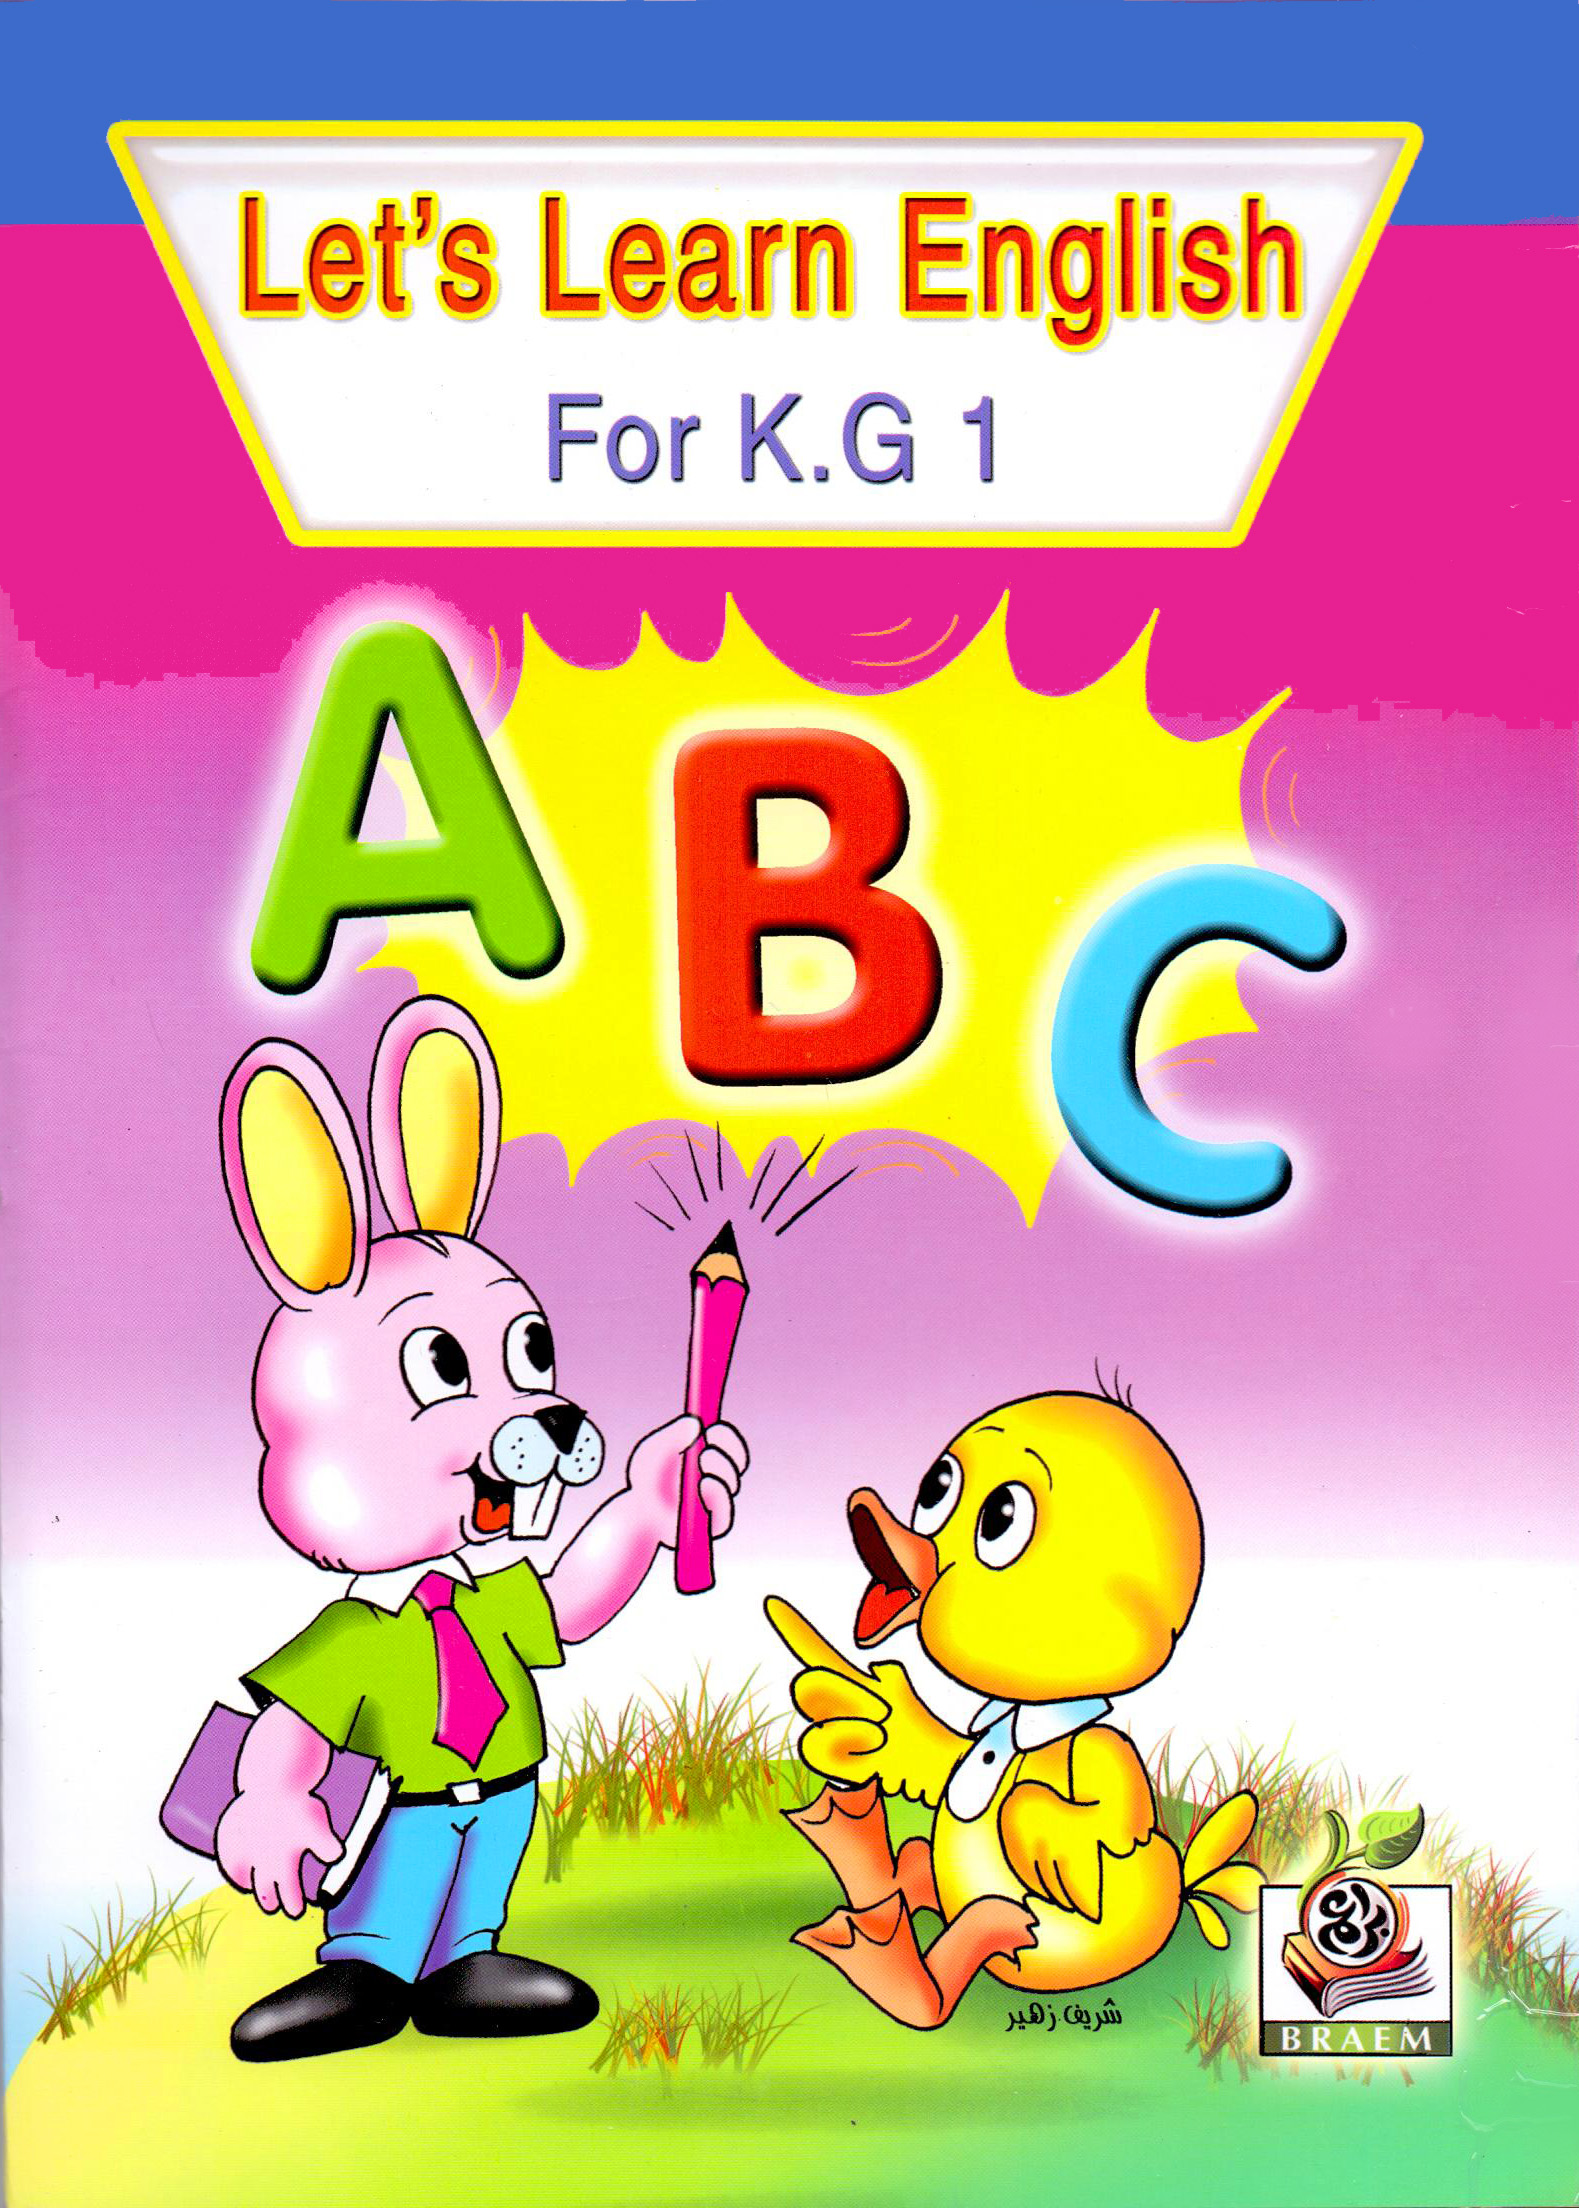 Let's Learn English For K. G 1